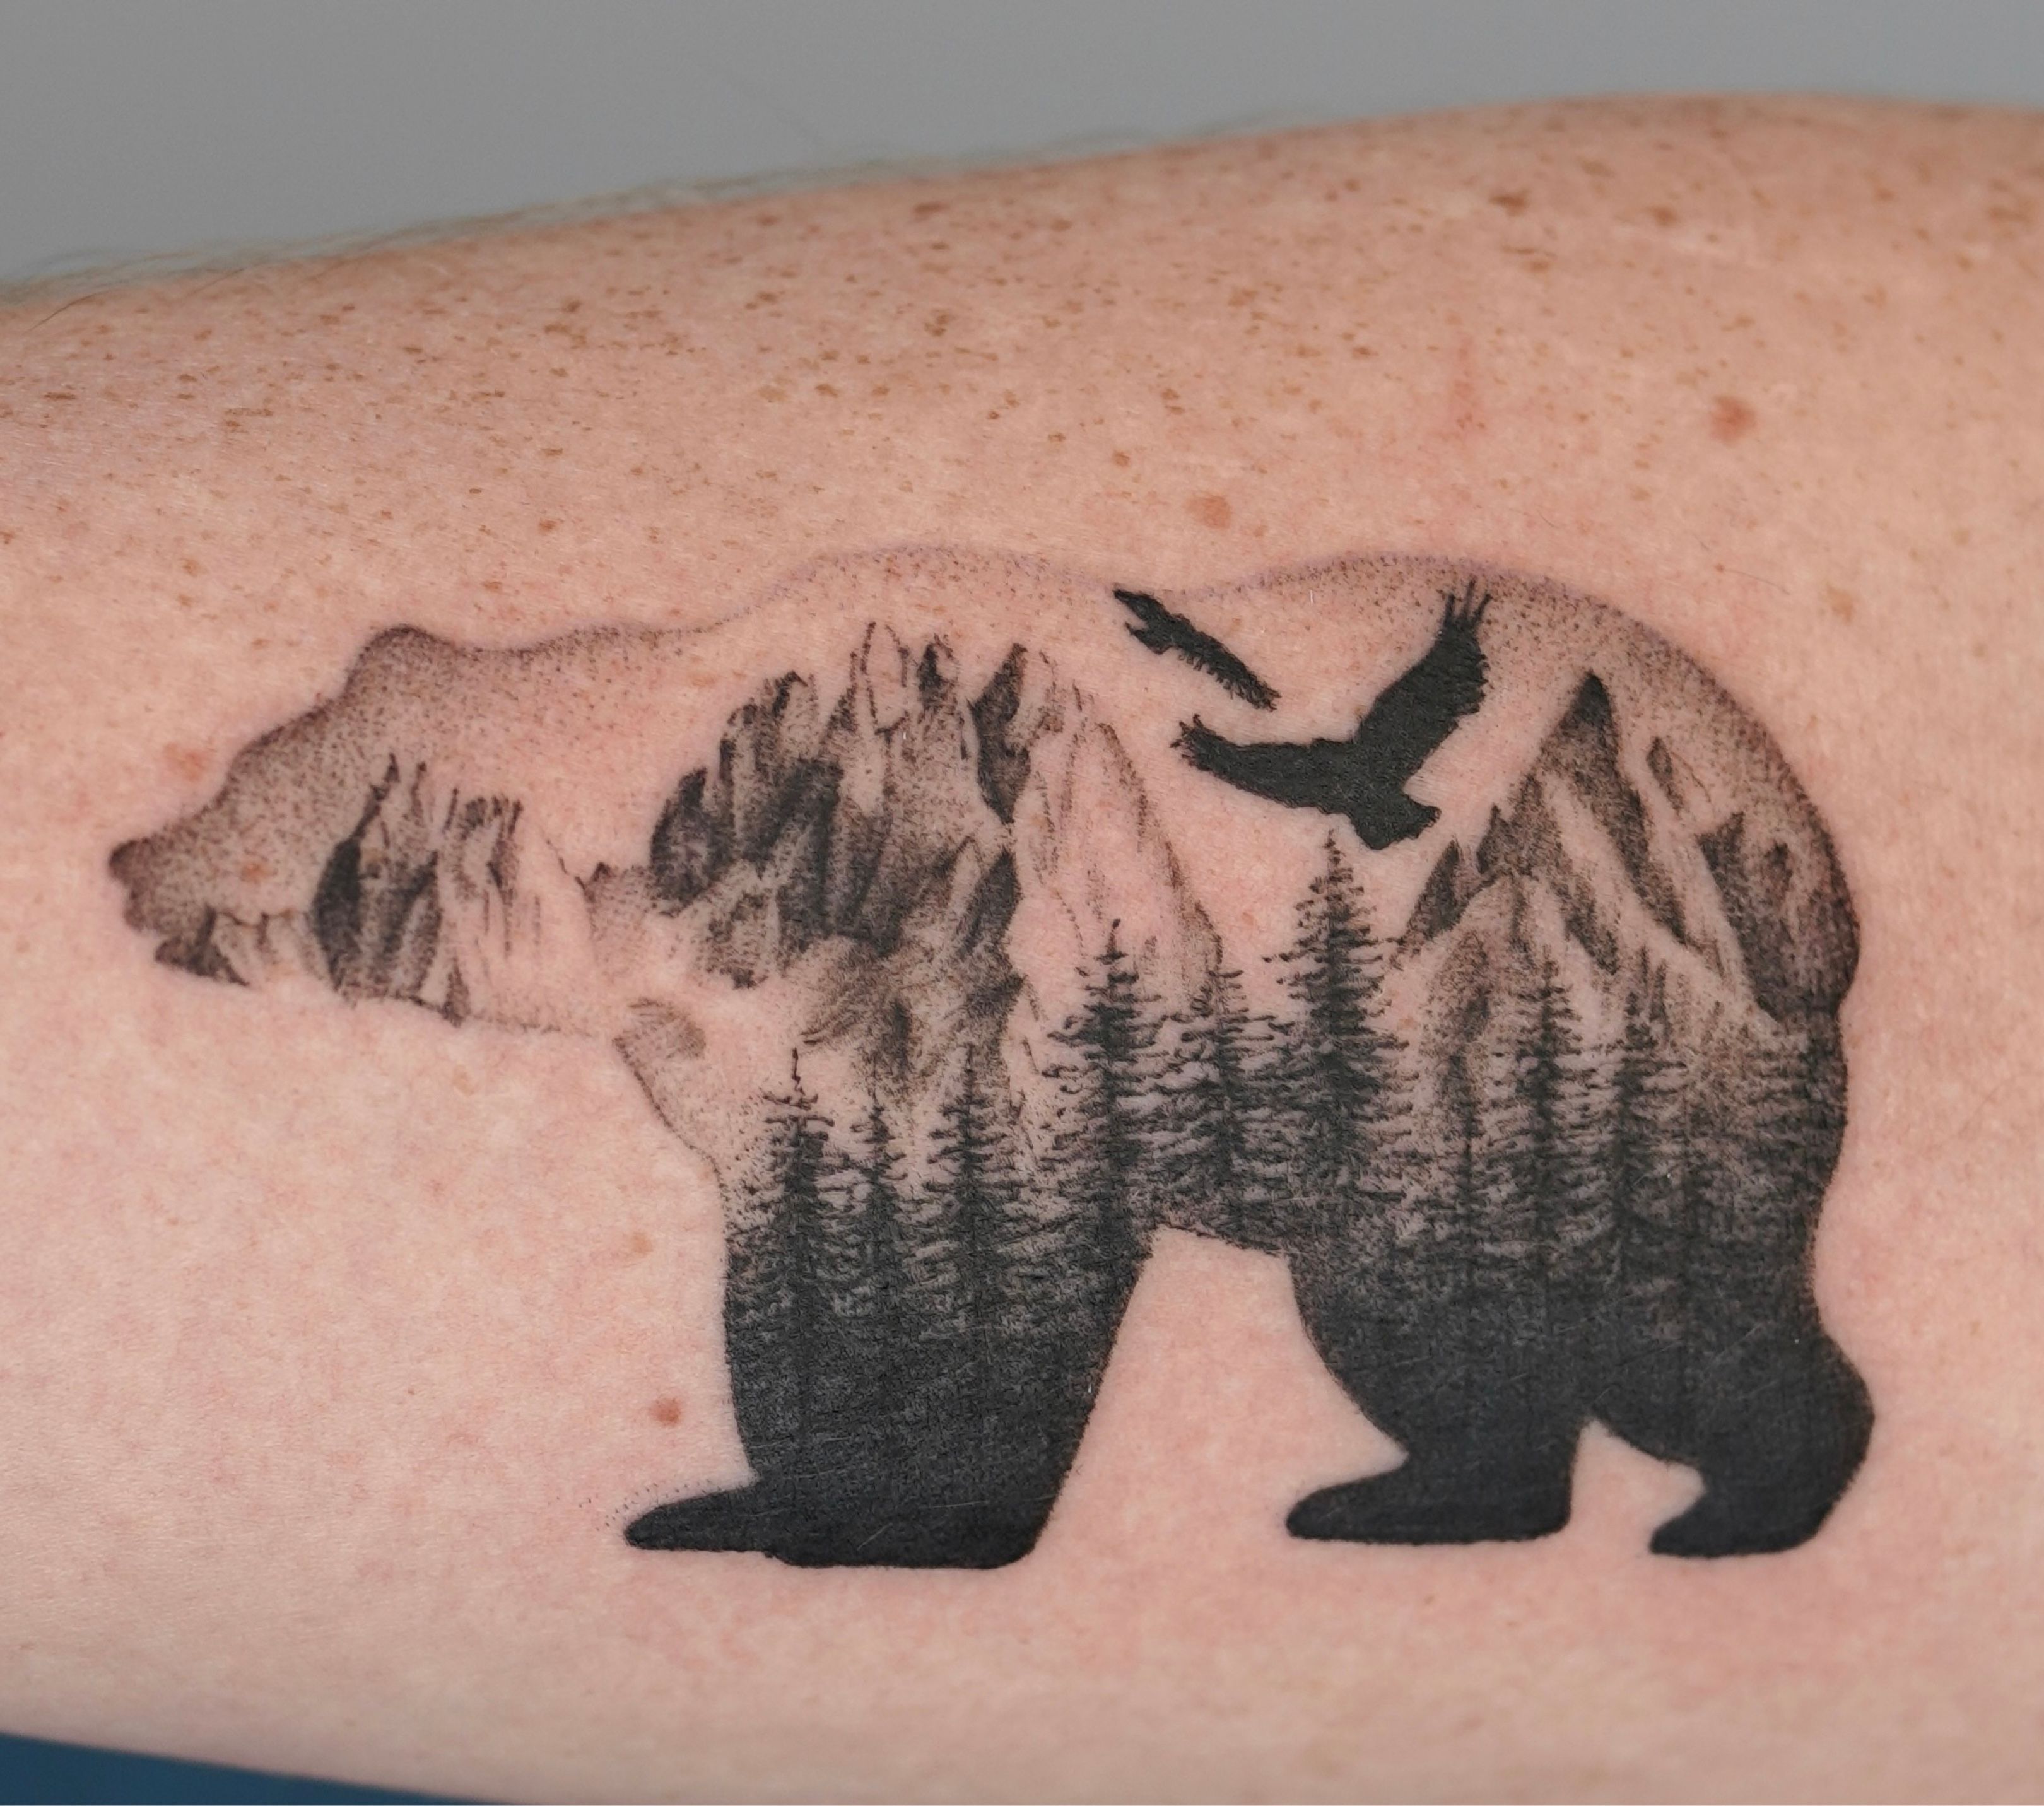 Tattoo uploaded by Jeff • Bear silhouette tattoo with trees, mountains, and  birds. By Chris Xu at MODO INK #blackandgray #bear #nature #tattoo #birds  #mountains #trees • Tattoodo